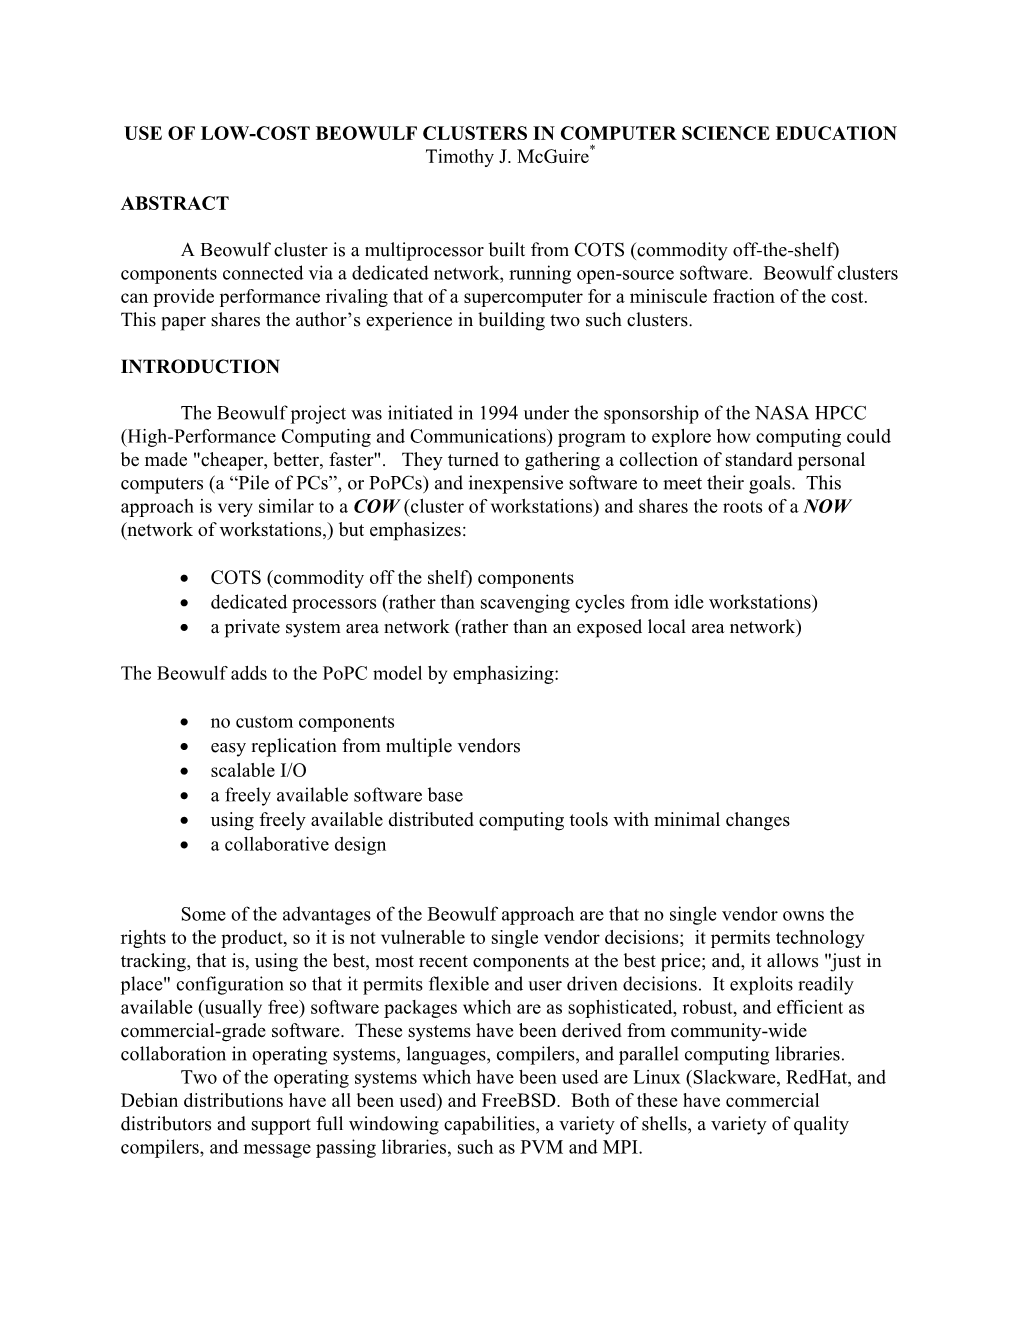 USE of LOW-COST BEOWULF CLUSTERS in COMPUTER SCIENCE EDUCATION Timothy J